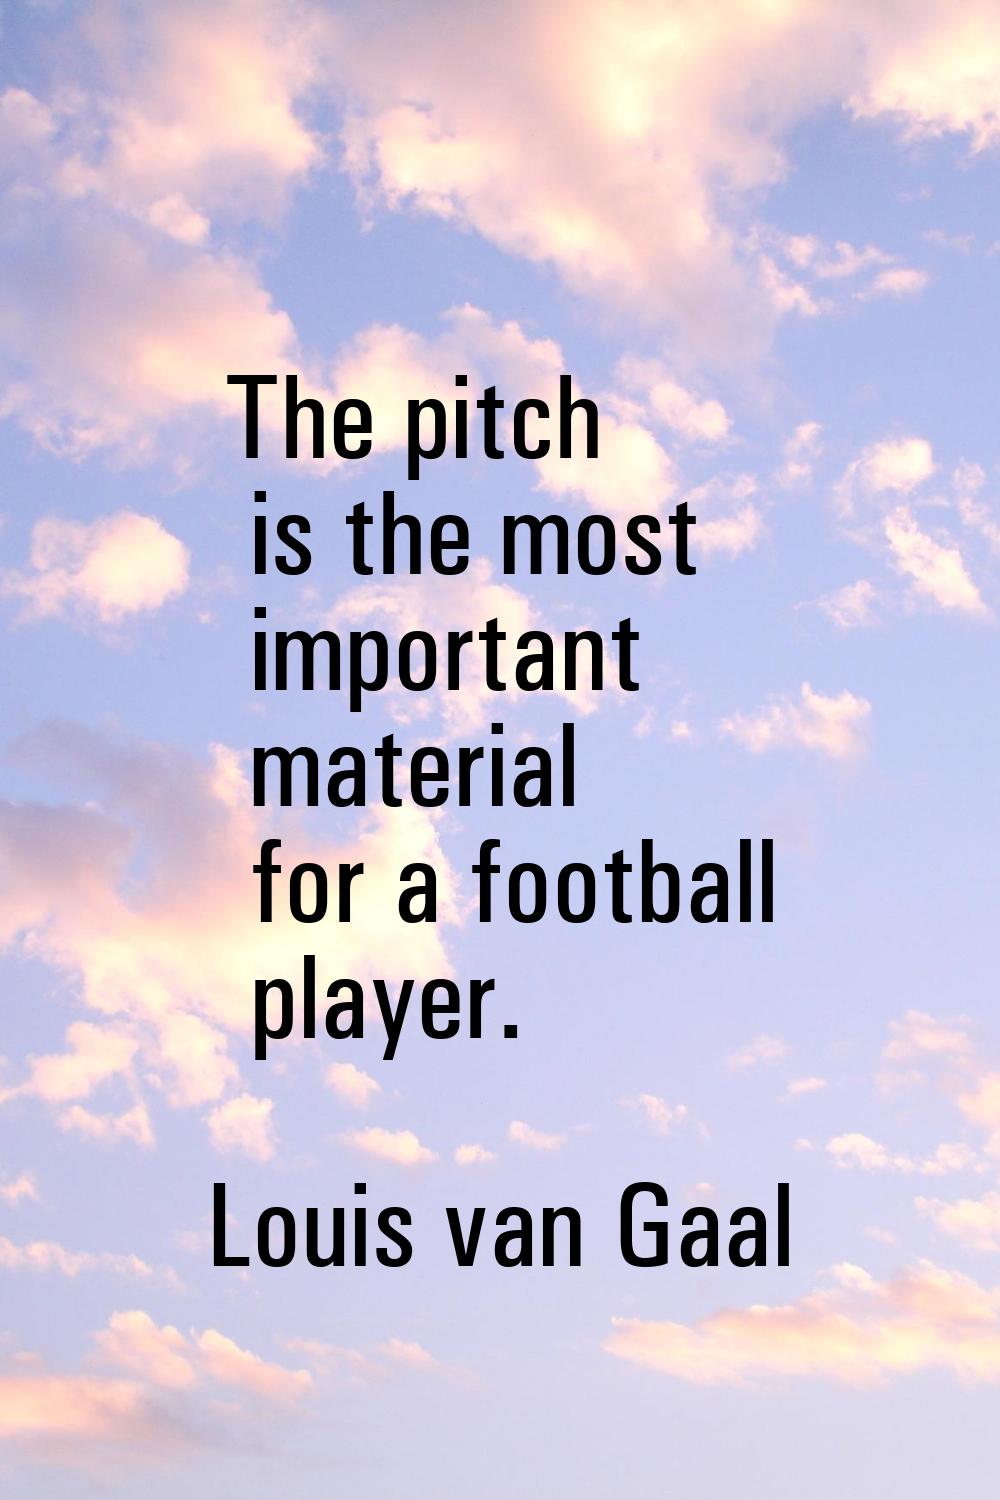 The pitch is the most important material for a football player.